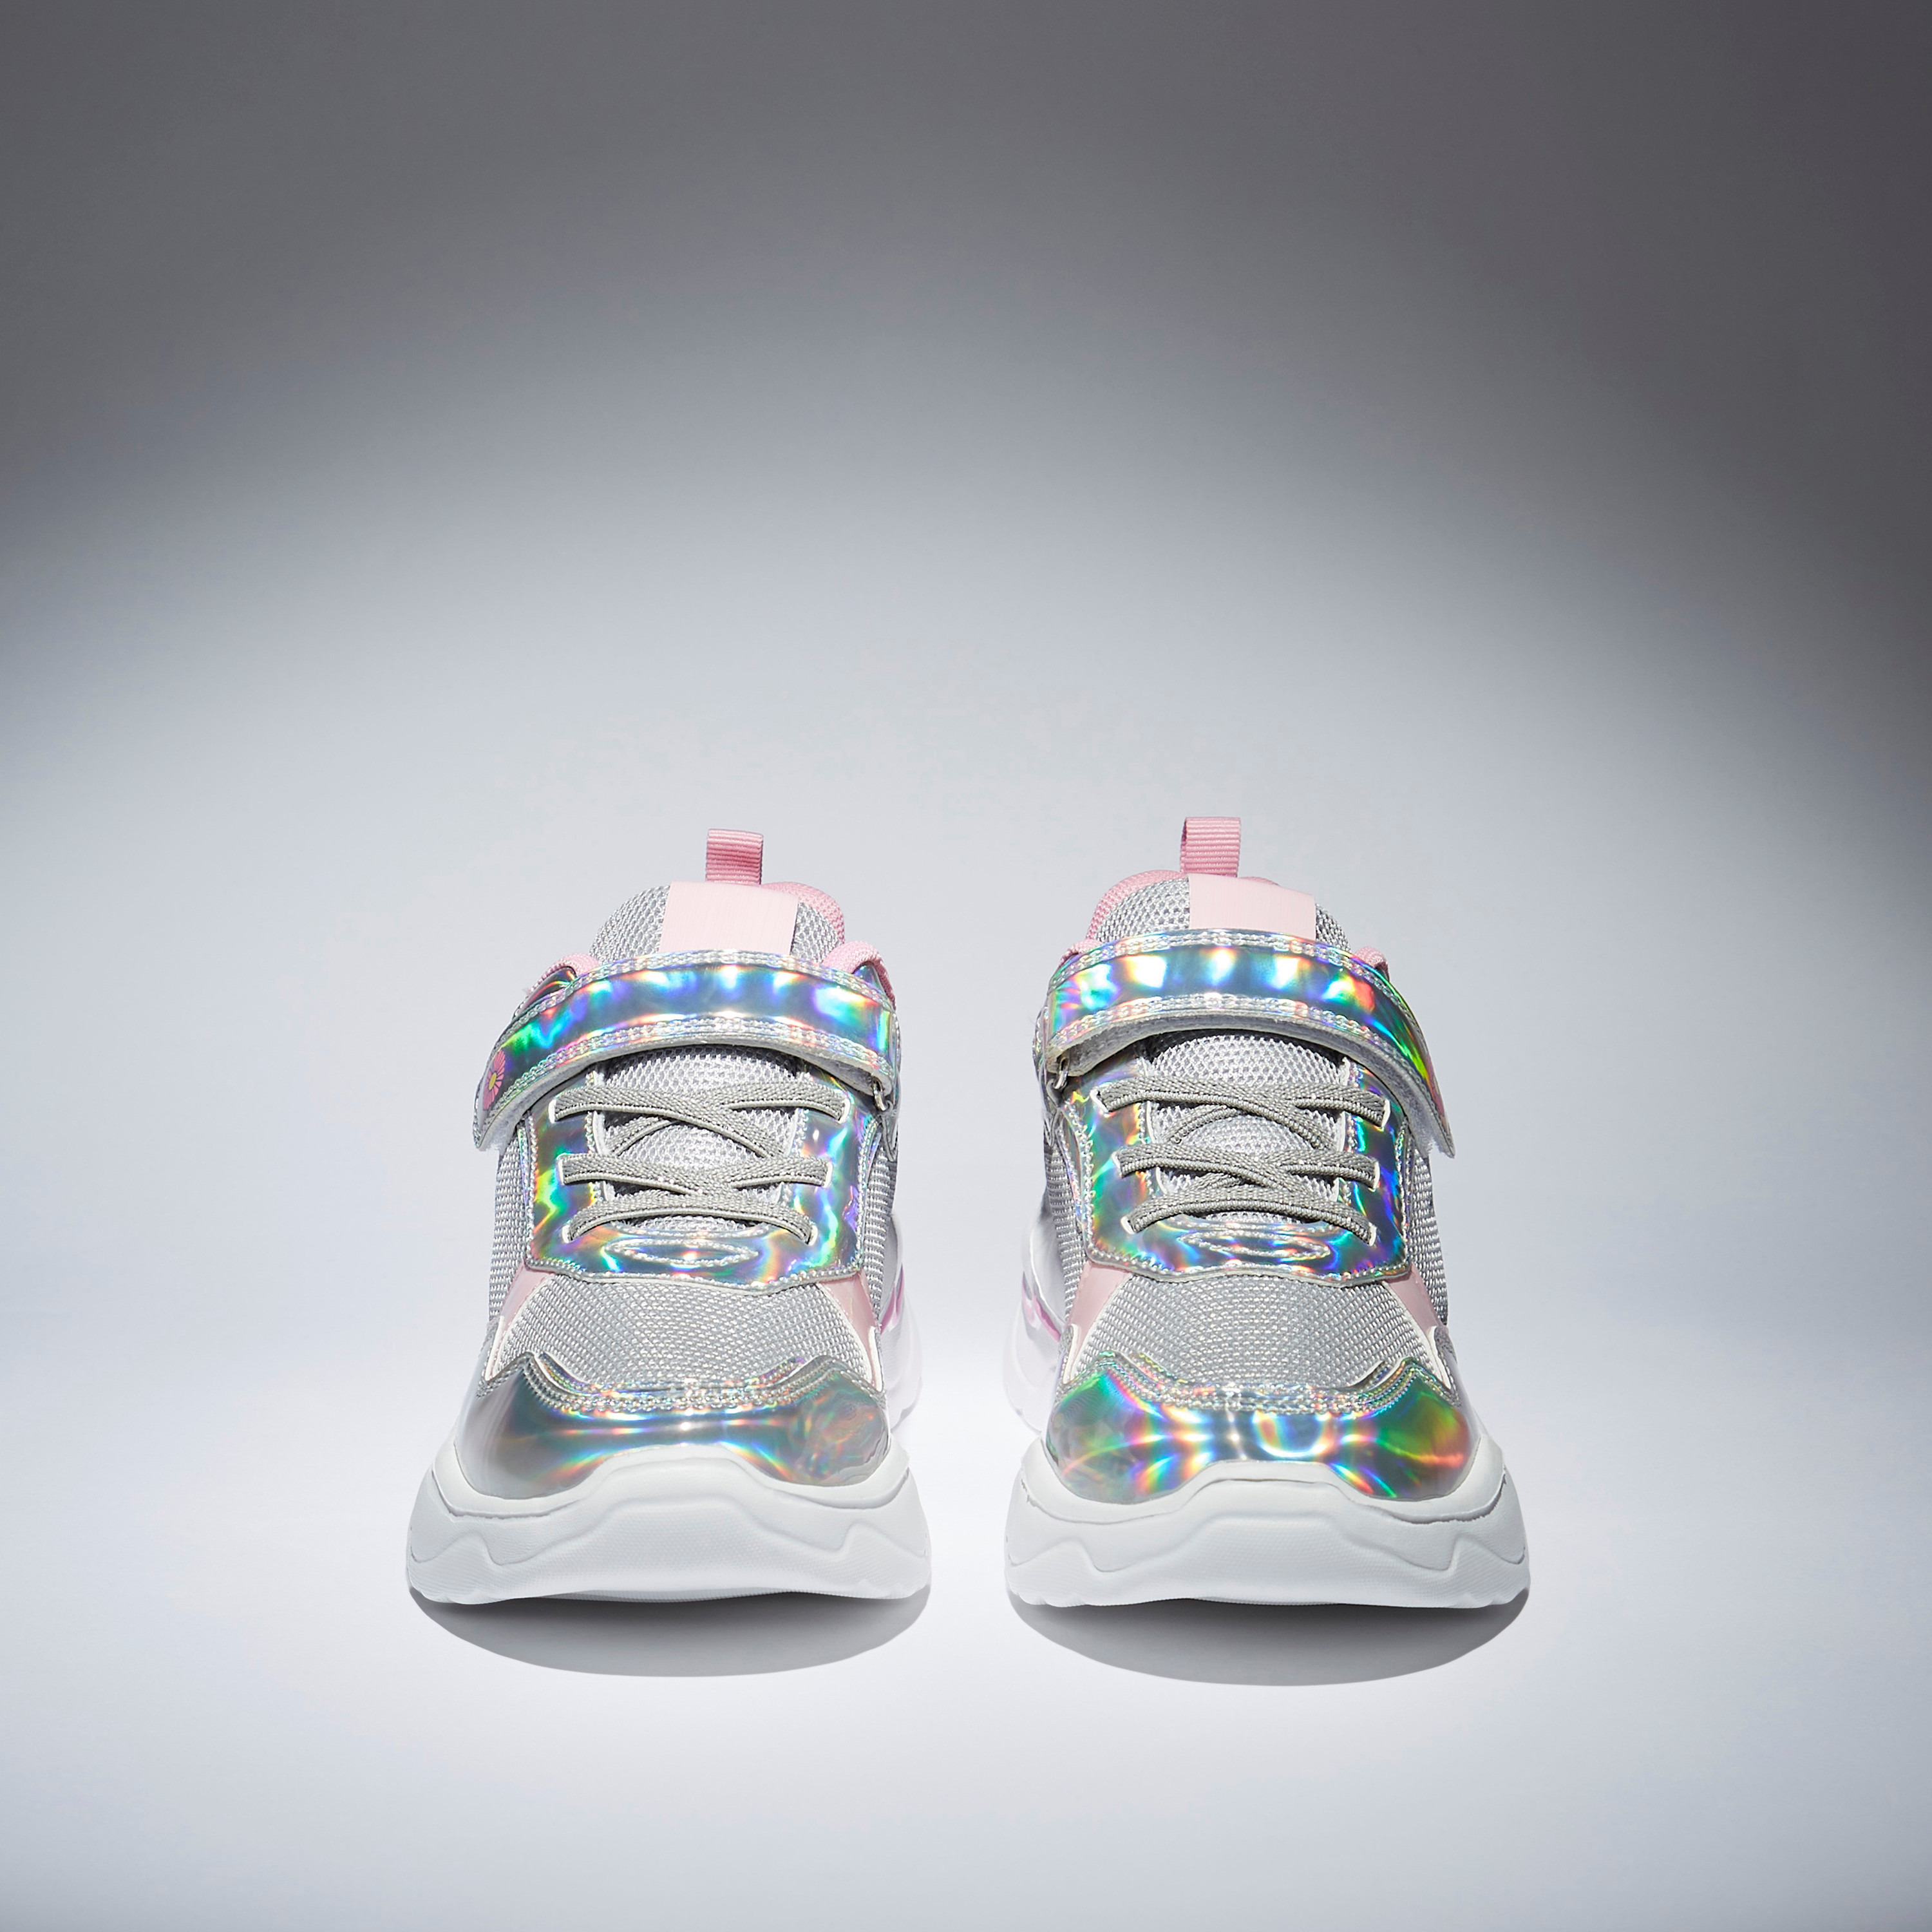 Holographic Psychedelic High Top Sneakers, High Top Shoes - Etsy